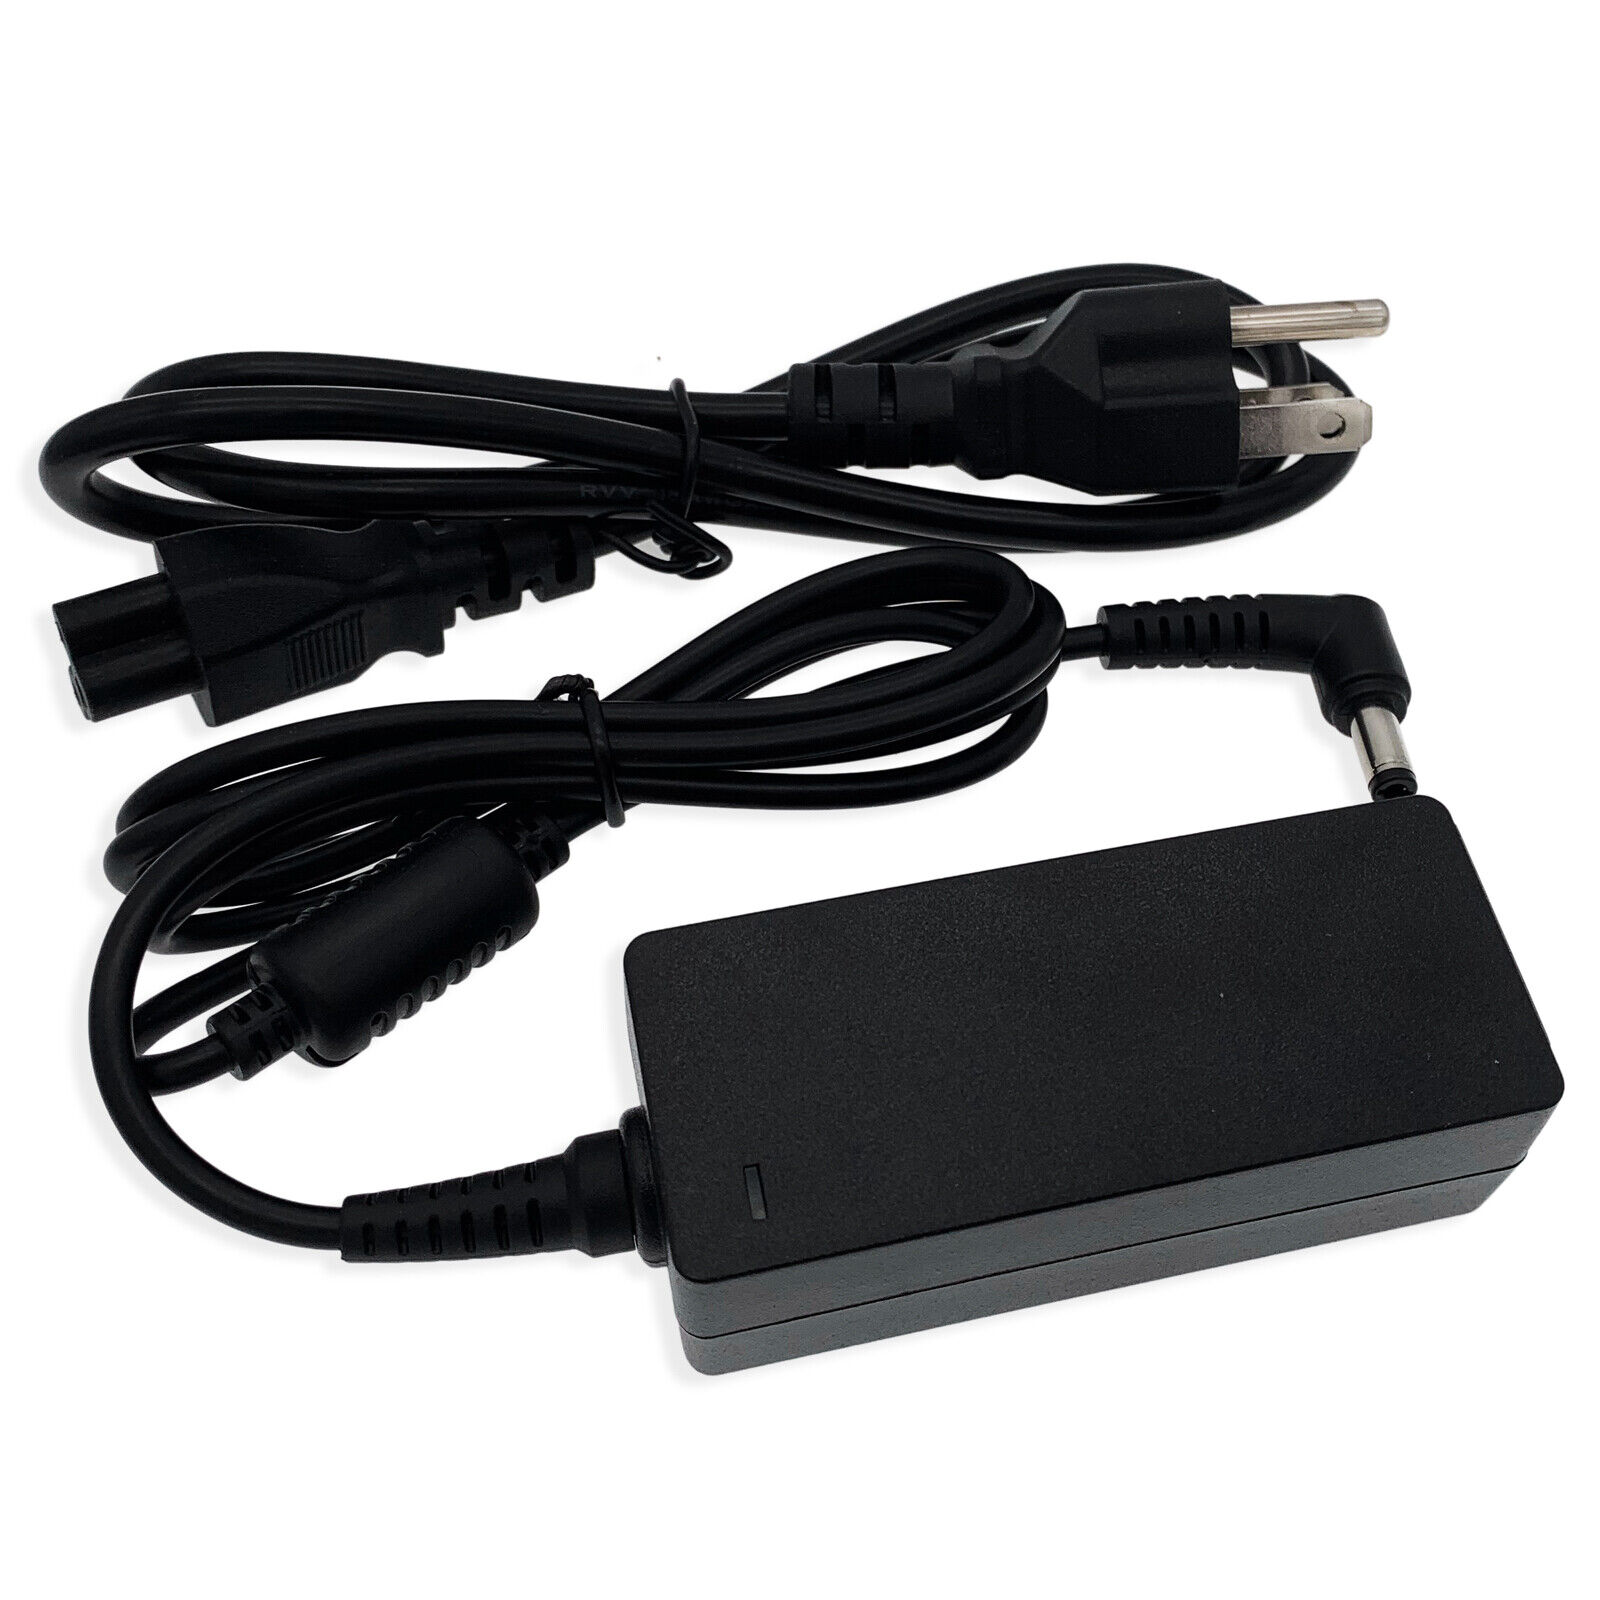 AC Adapter Power Supply for BladeZ R6 Recumbent Bike Country/Region of Manufacture China Type AC/DC Power Adapter MPN D